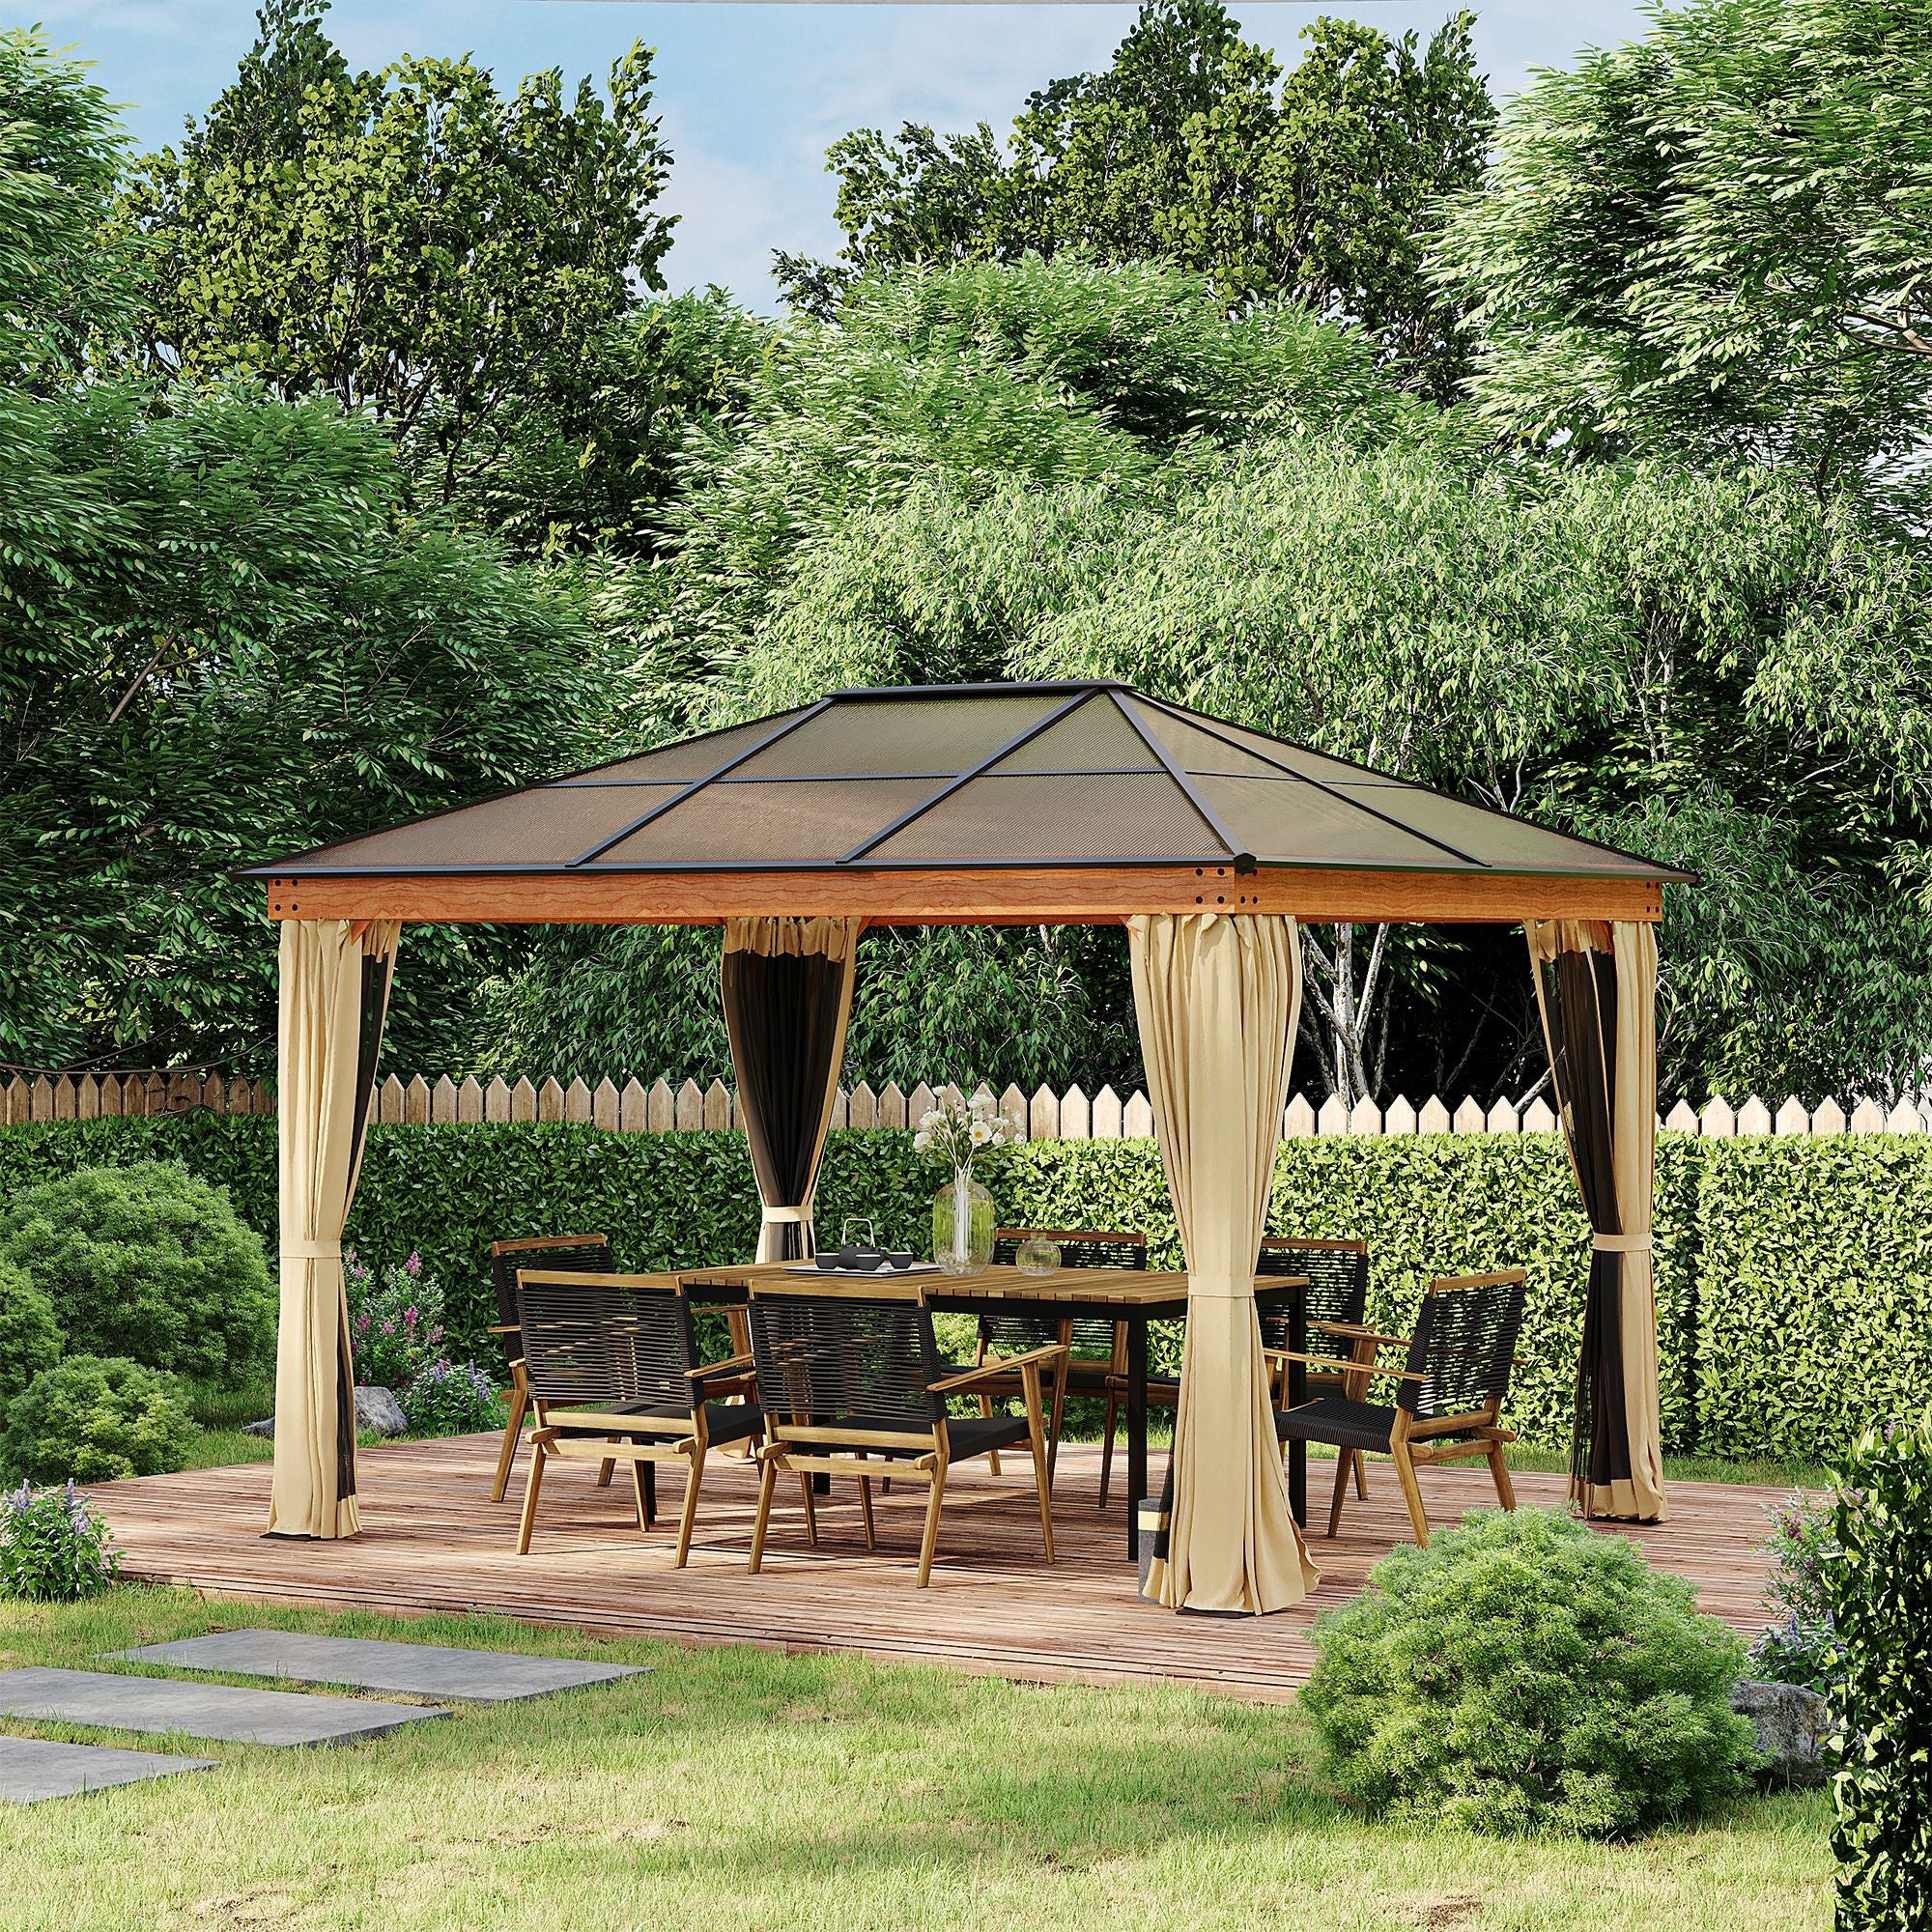 3 x 3.6 m Hardtop Gazebo Canopy with Polycarbonate Roof, Aluminium and Steel Frame, Nettings and Sidewalls for Garden, Patio, Khaki-1